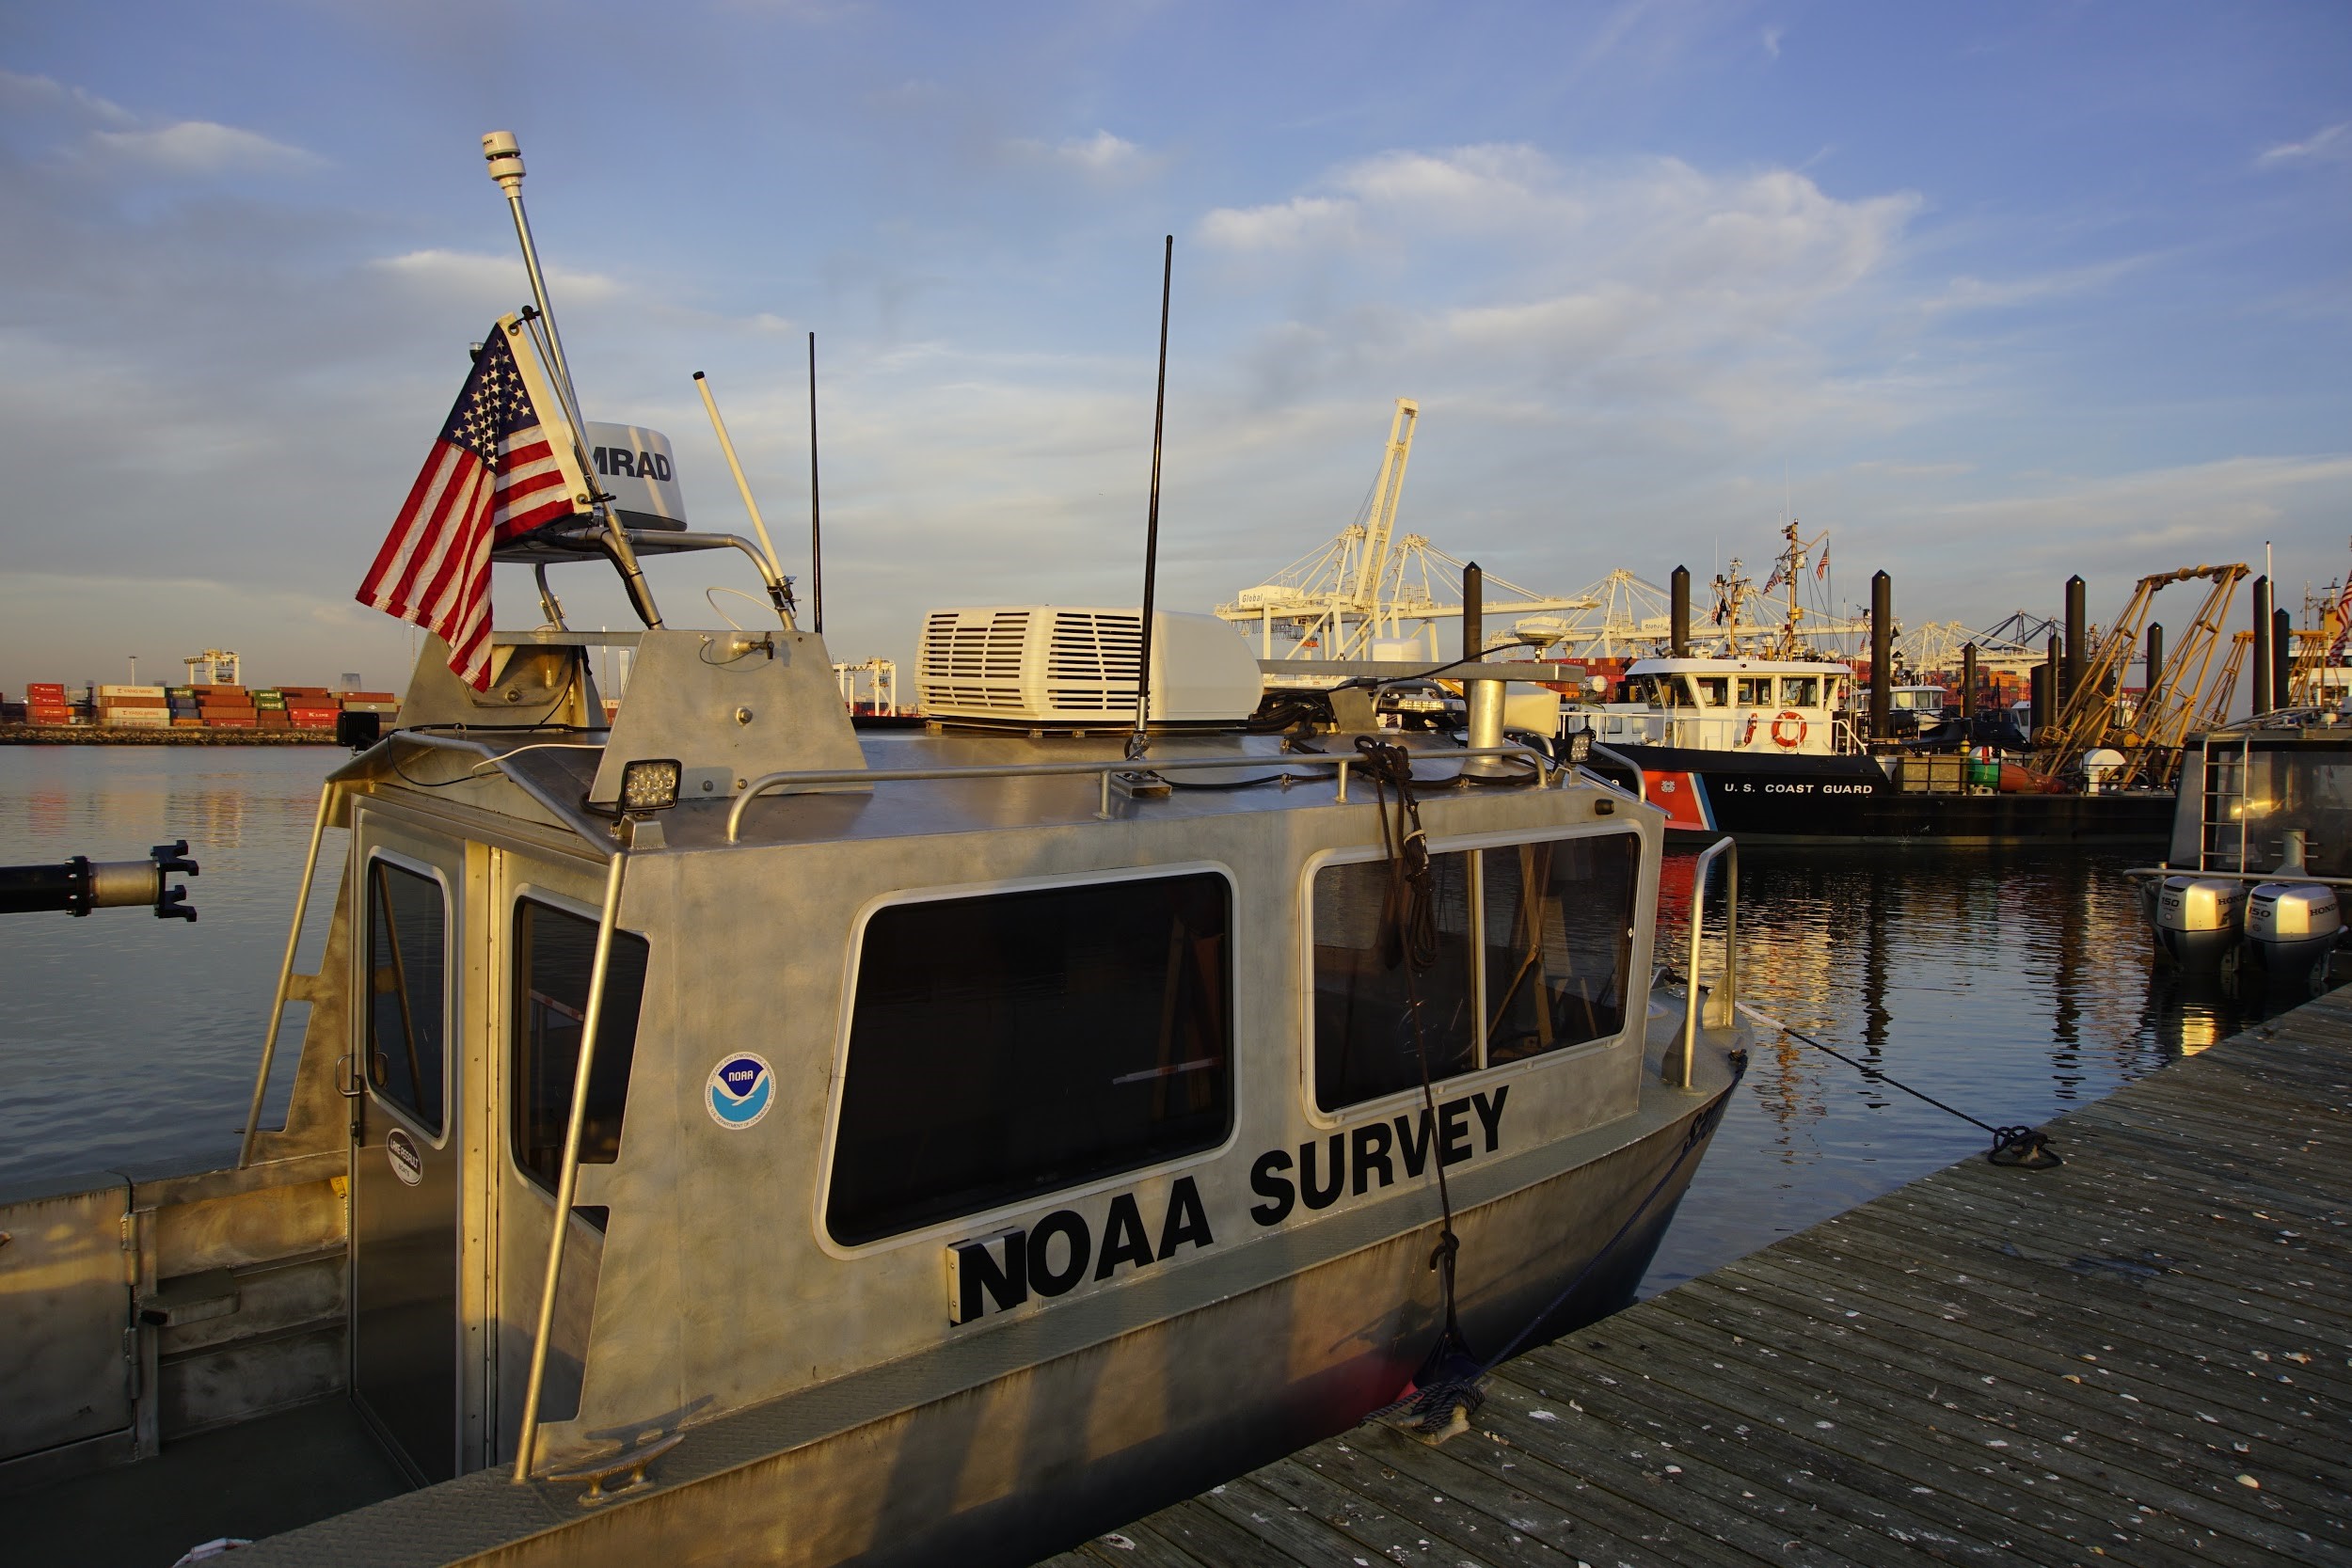 During NRT5’s responses in areas surrounding the New York Harbor, the USCG Aids to Navigation Team (ANT) in Bayonne, New Jersey, offered the team a spot to dock their vessel at the end of the day. This sheltered station provided safety from poor weather conditions and allowed the team to quickly transit to project areas. Here, NOAA survey vessel S3007 is moored alongside at the USCG station.